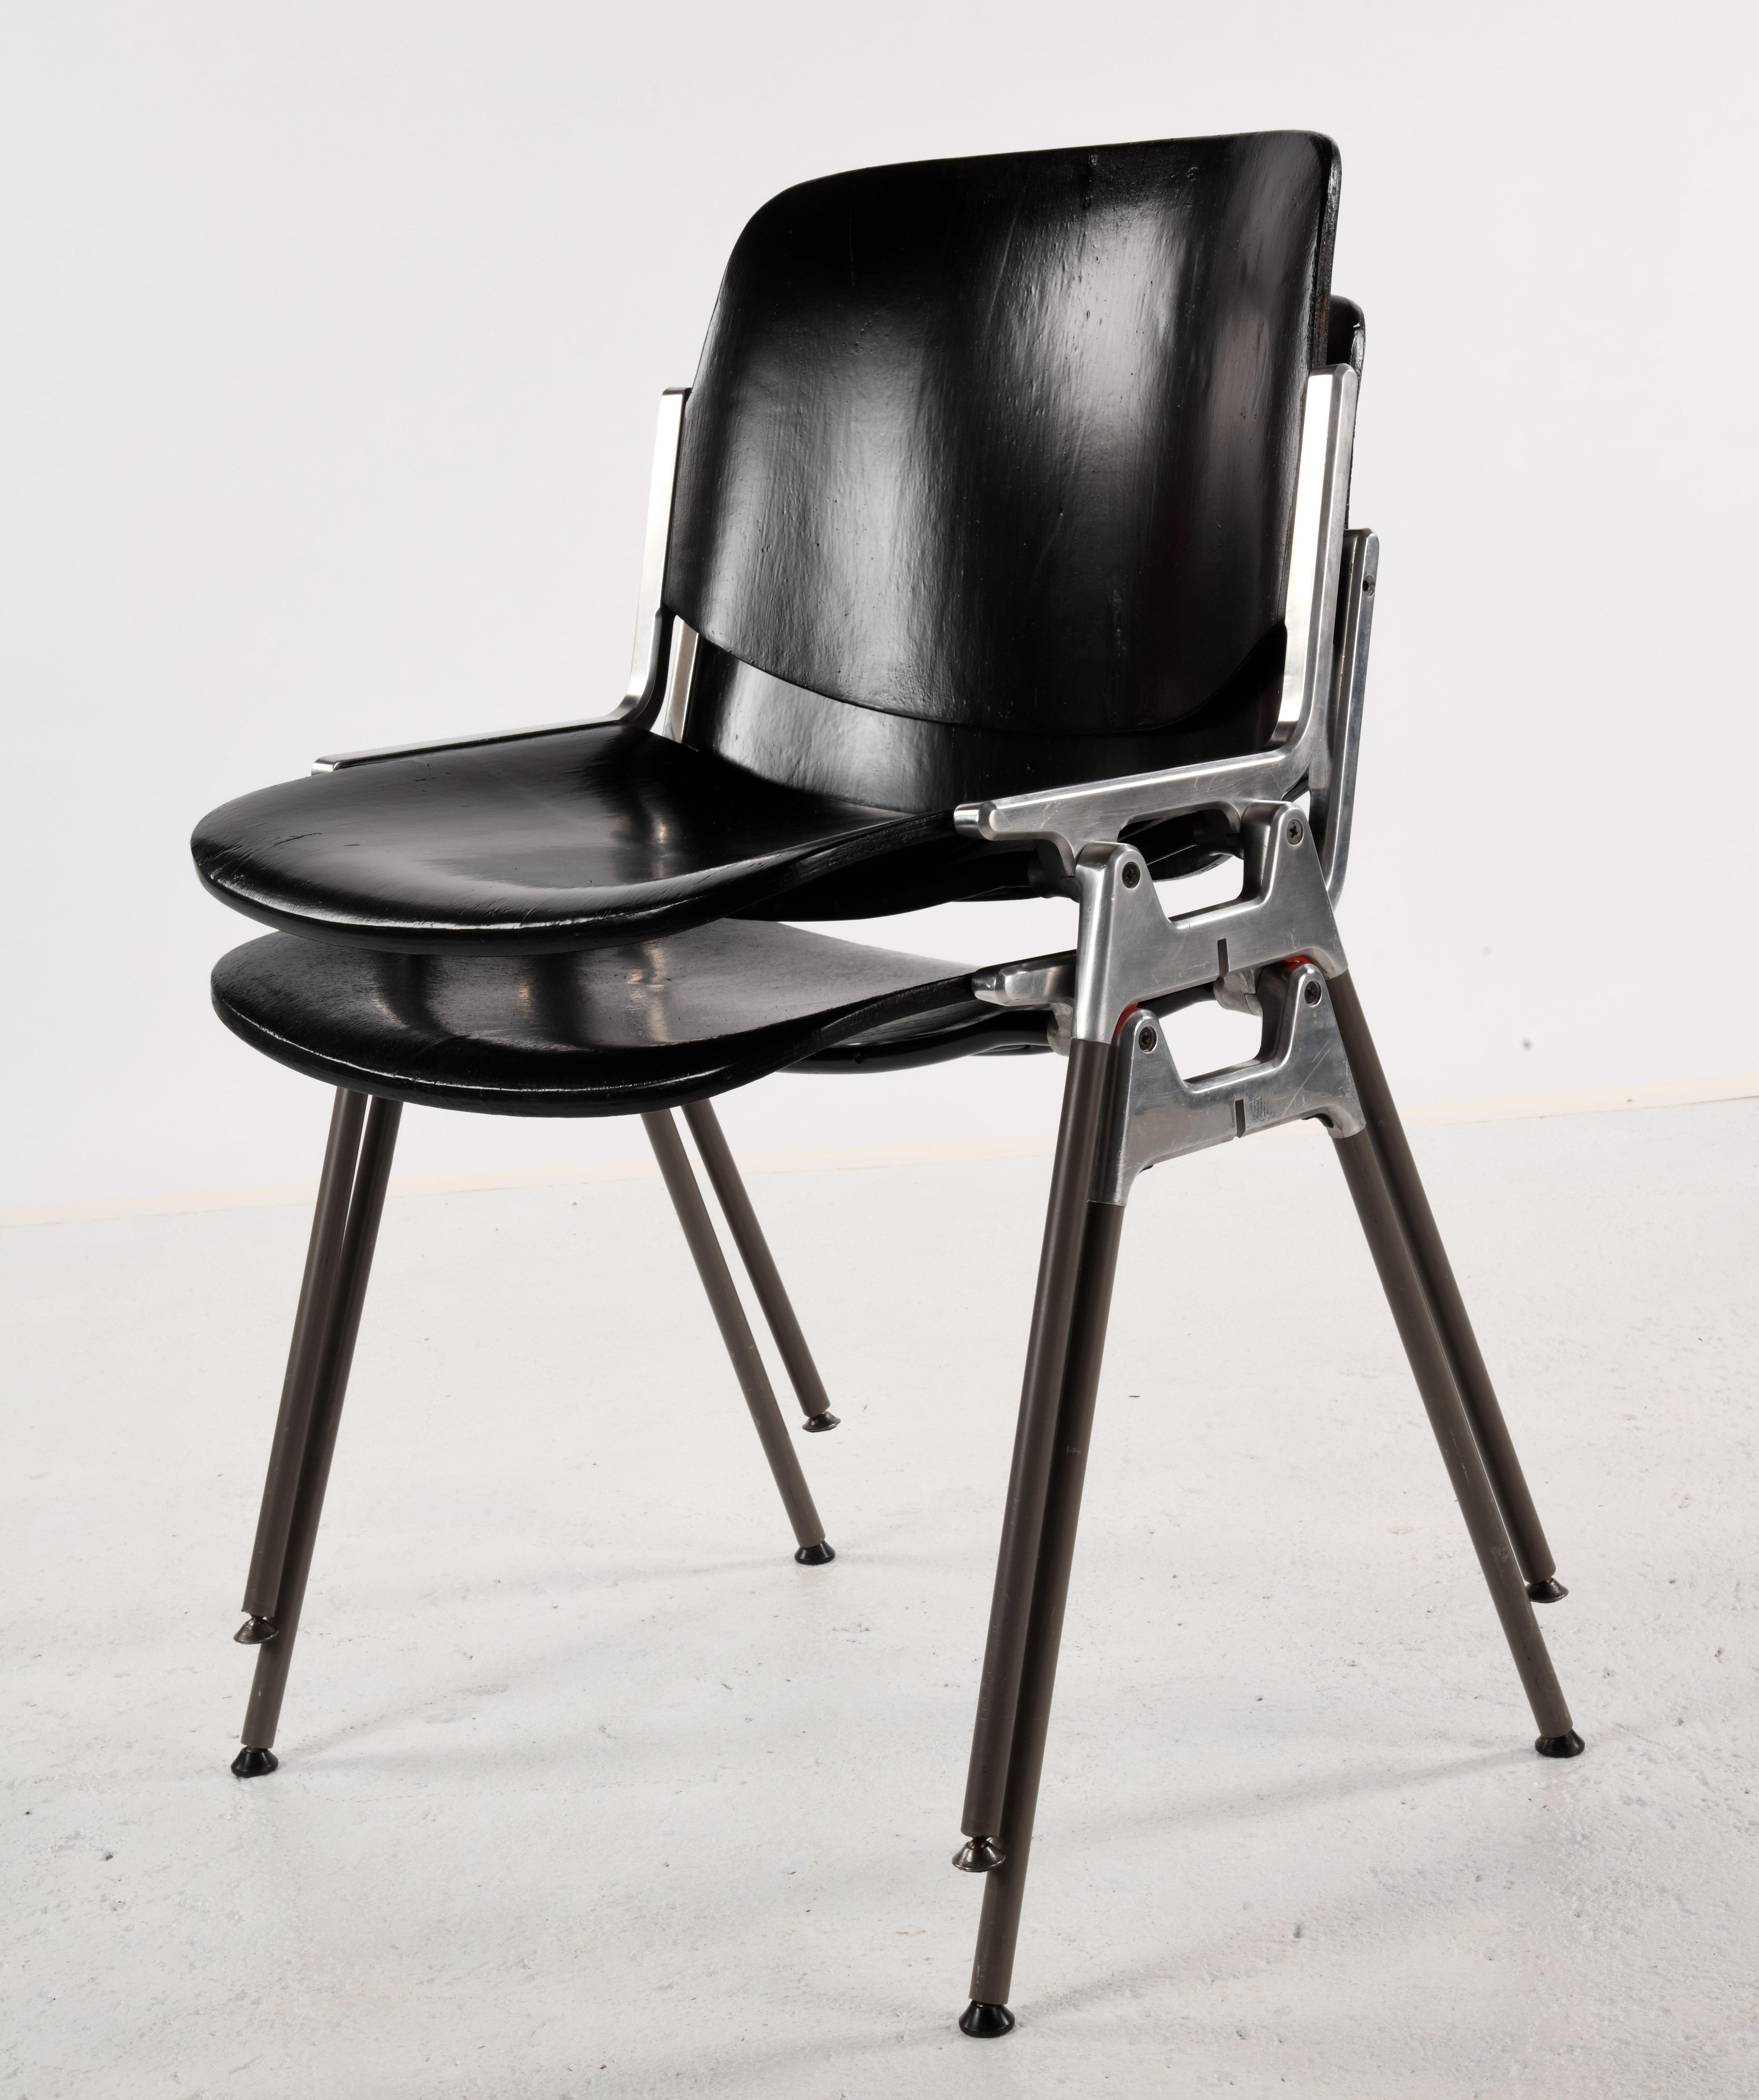 2 Castelli chairs DSC-106 model designed by Giancarlo Piretti in the 60s For Sale 3